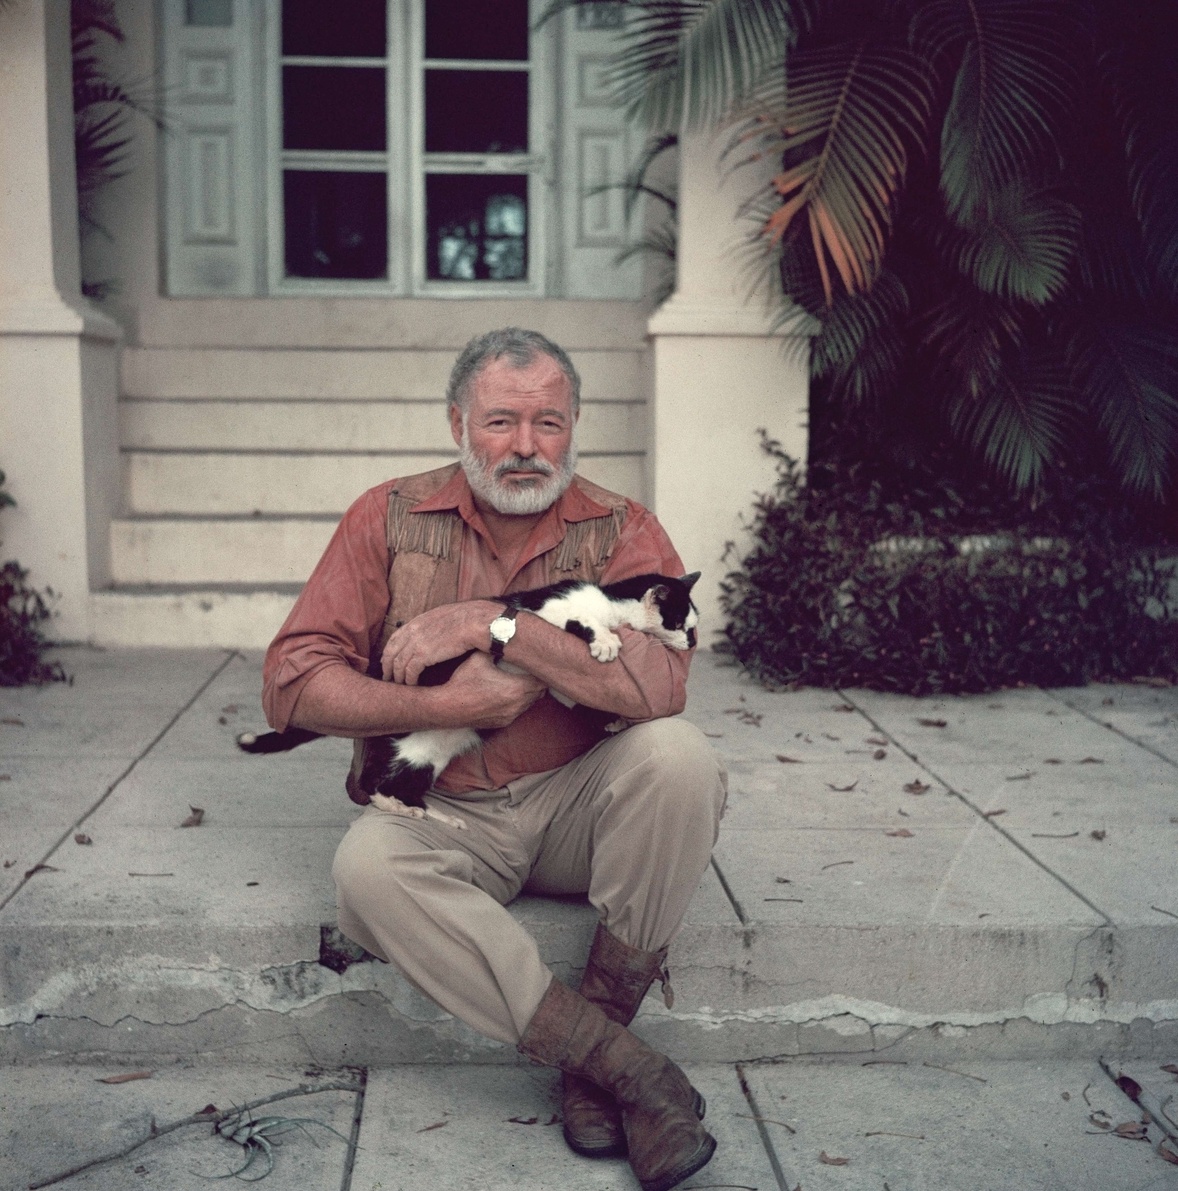 Here+is+Ernest+Hemingway+holding+one+of+his+cats%2C+circa+1954.+%28Photo+Credit%3A+Nordic+Museum%2C+Public+domain%2C+via+Wikimedia+Commons%29